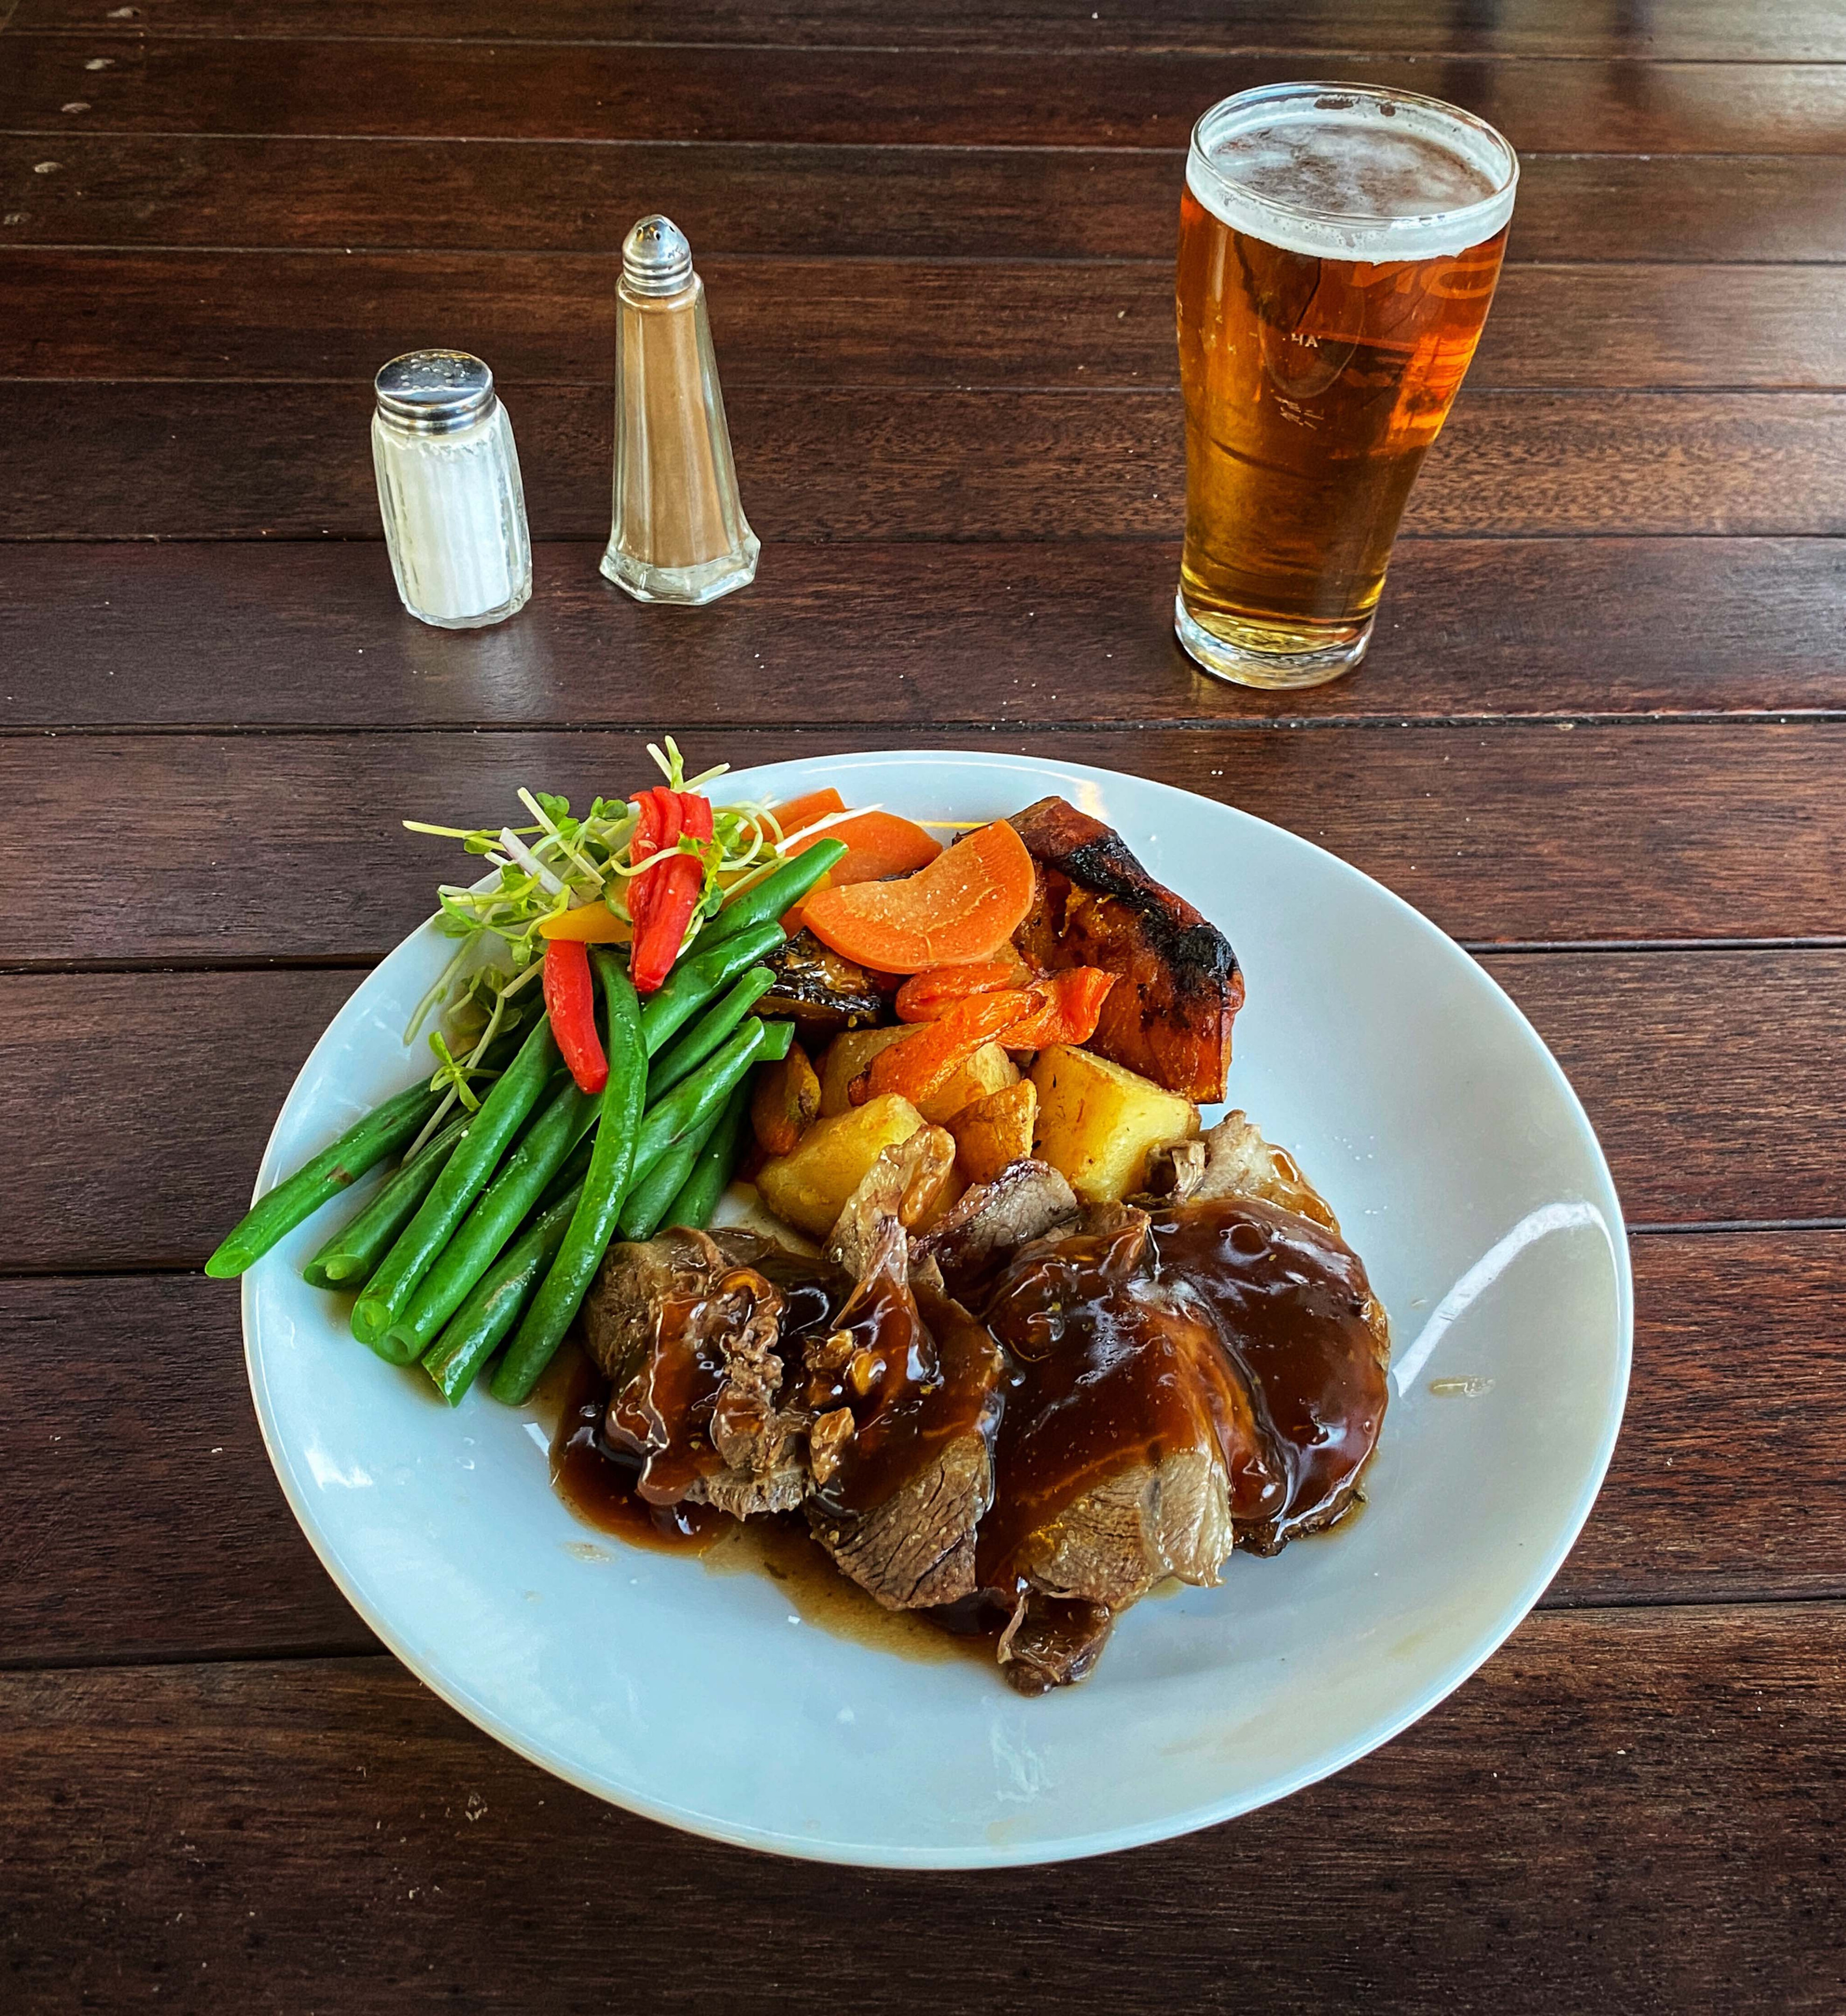 c6f11f8c/sunday roast at the albion hotel is delicious top 5 normanton jpg